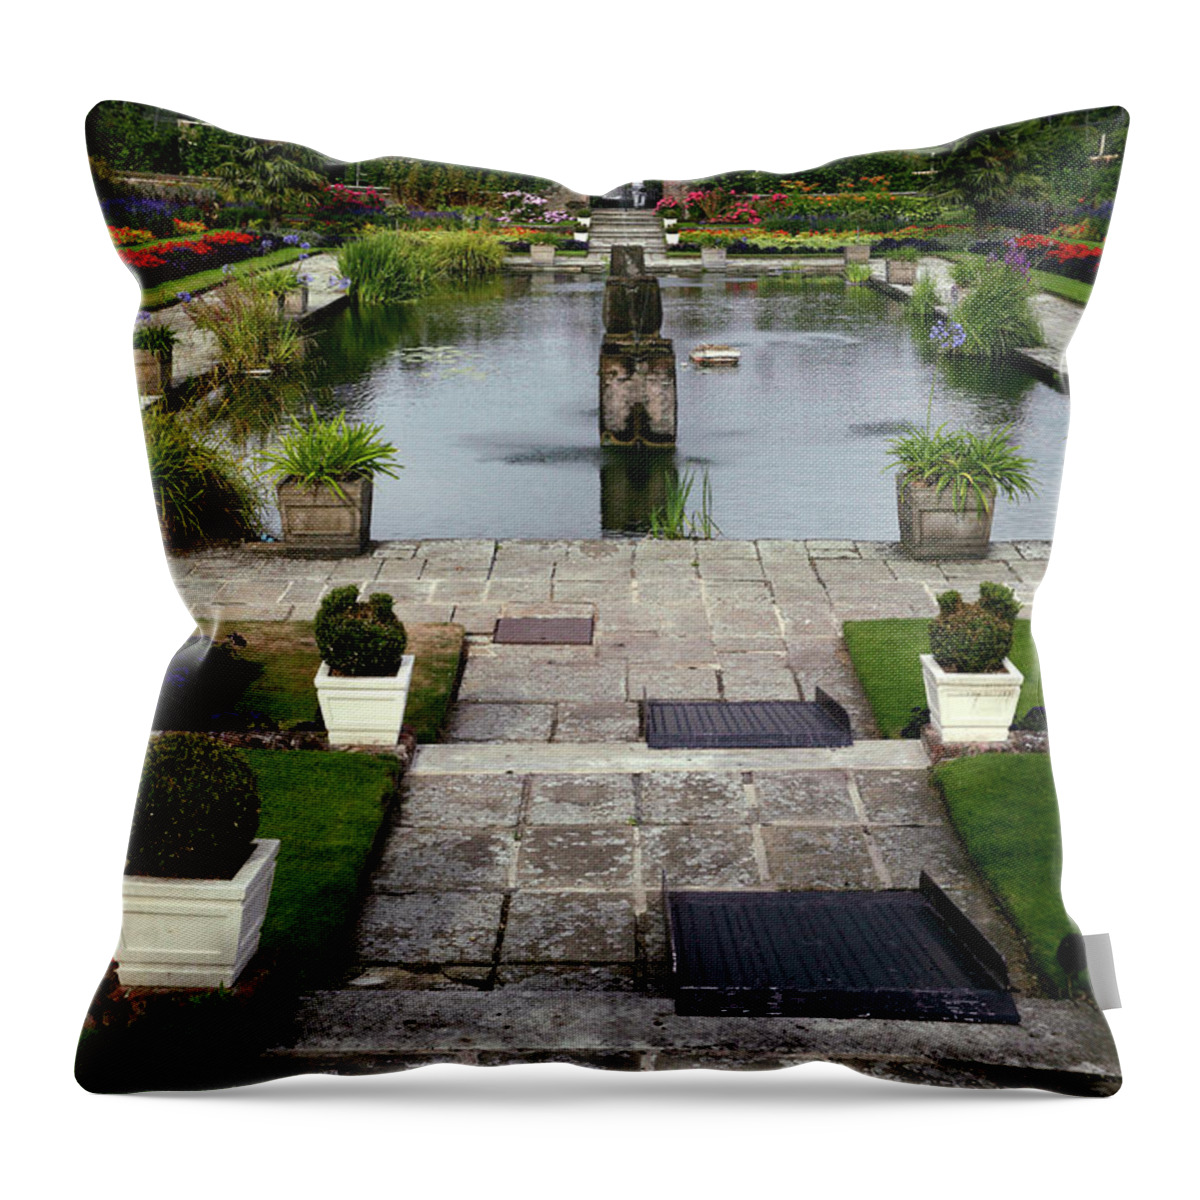 England Throw Pillow featuring the photograph Secret Garden At Kensington Palace by Lonely Planet